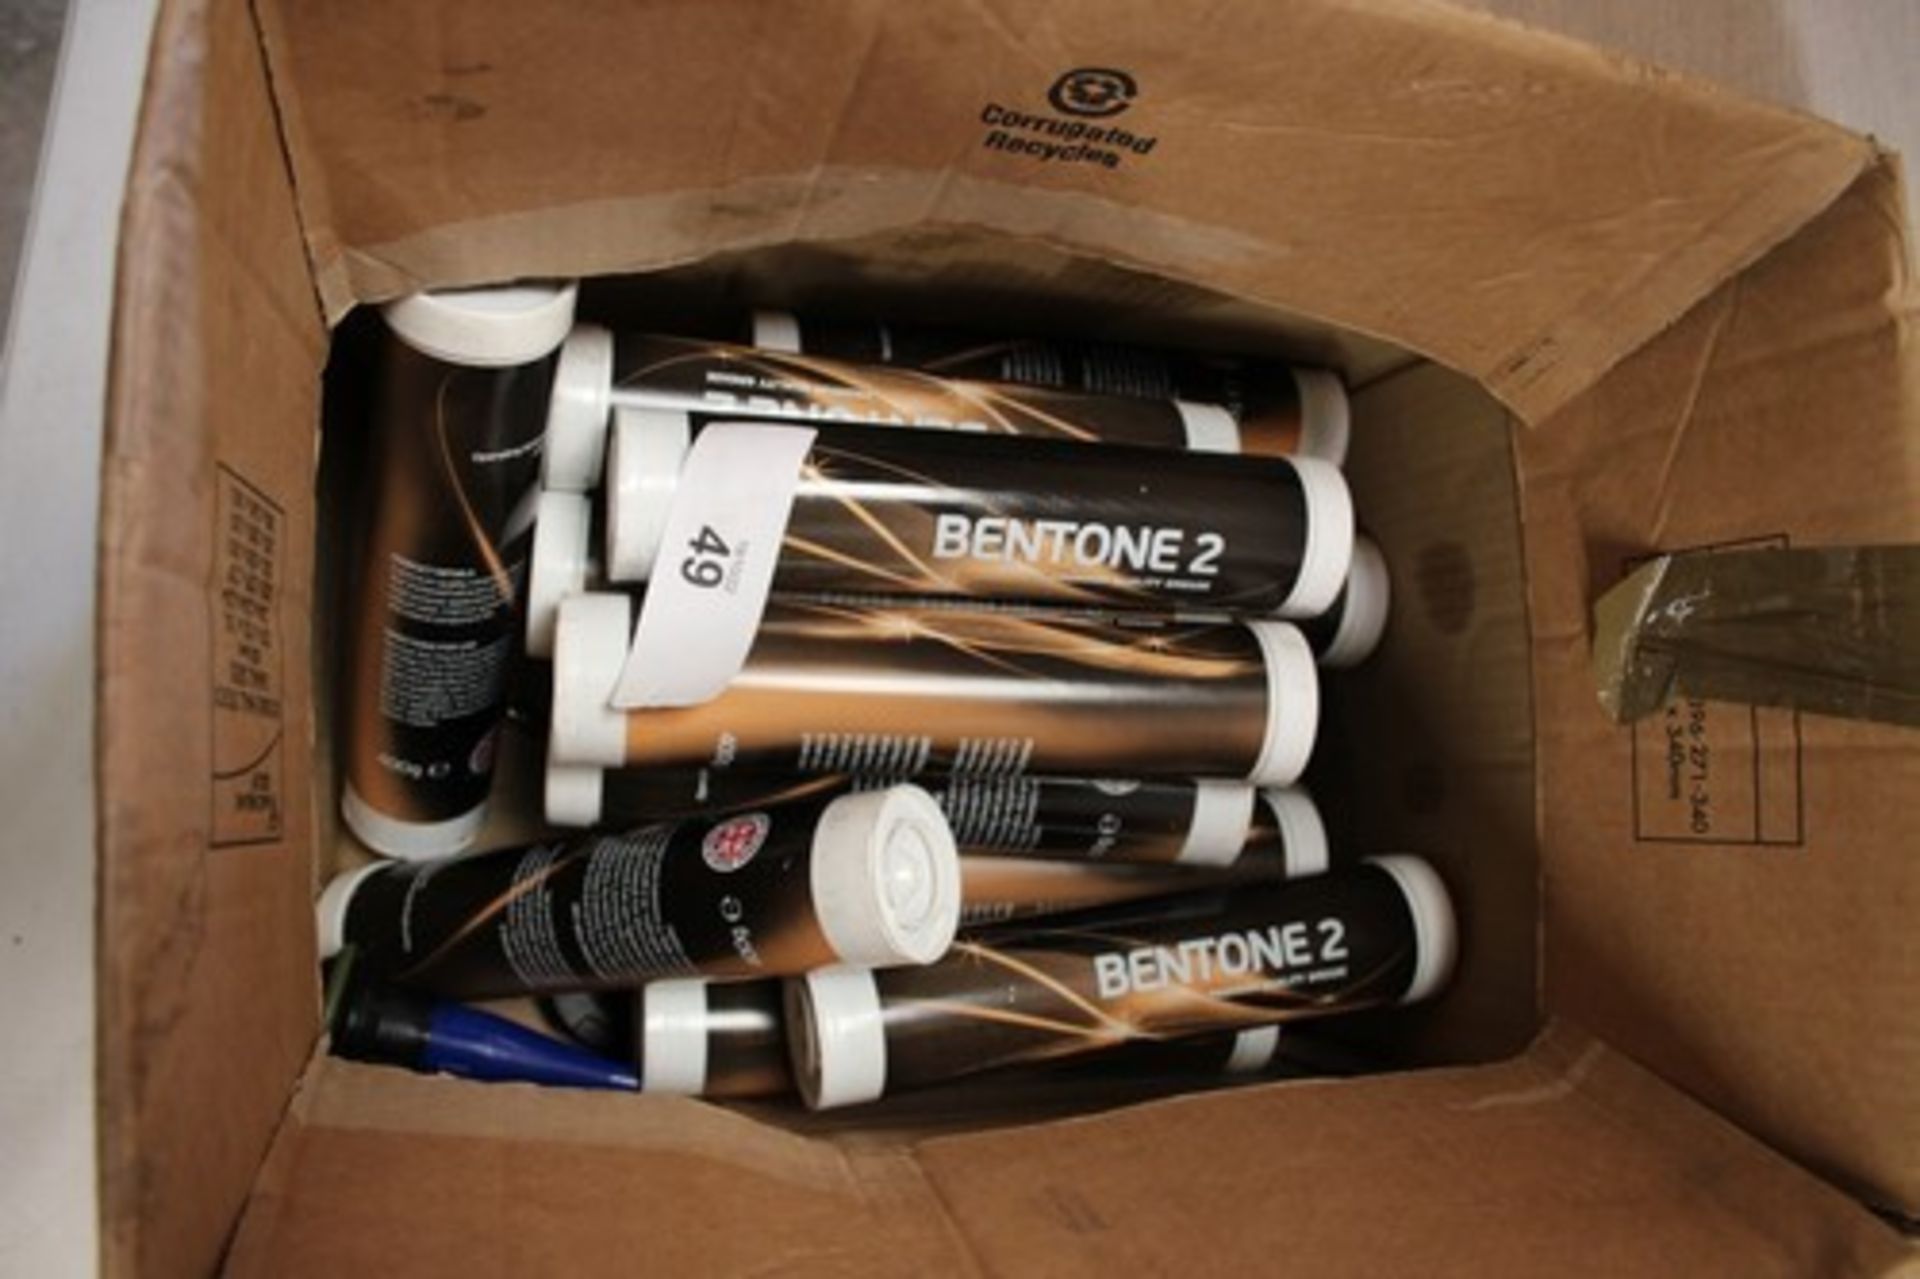 1 x Samoa grease gun, 1 x Eclipse injection gun, together with 18 x 400g tubes of Bentone 2 grease - - Image 2 of 4